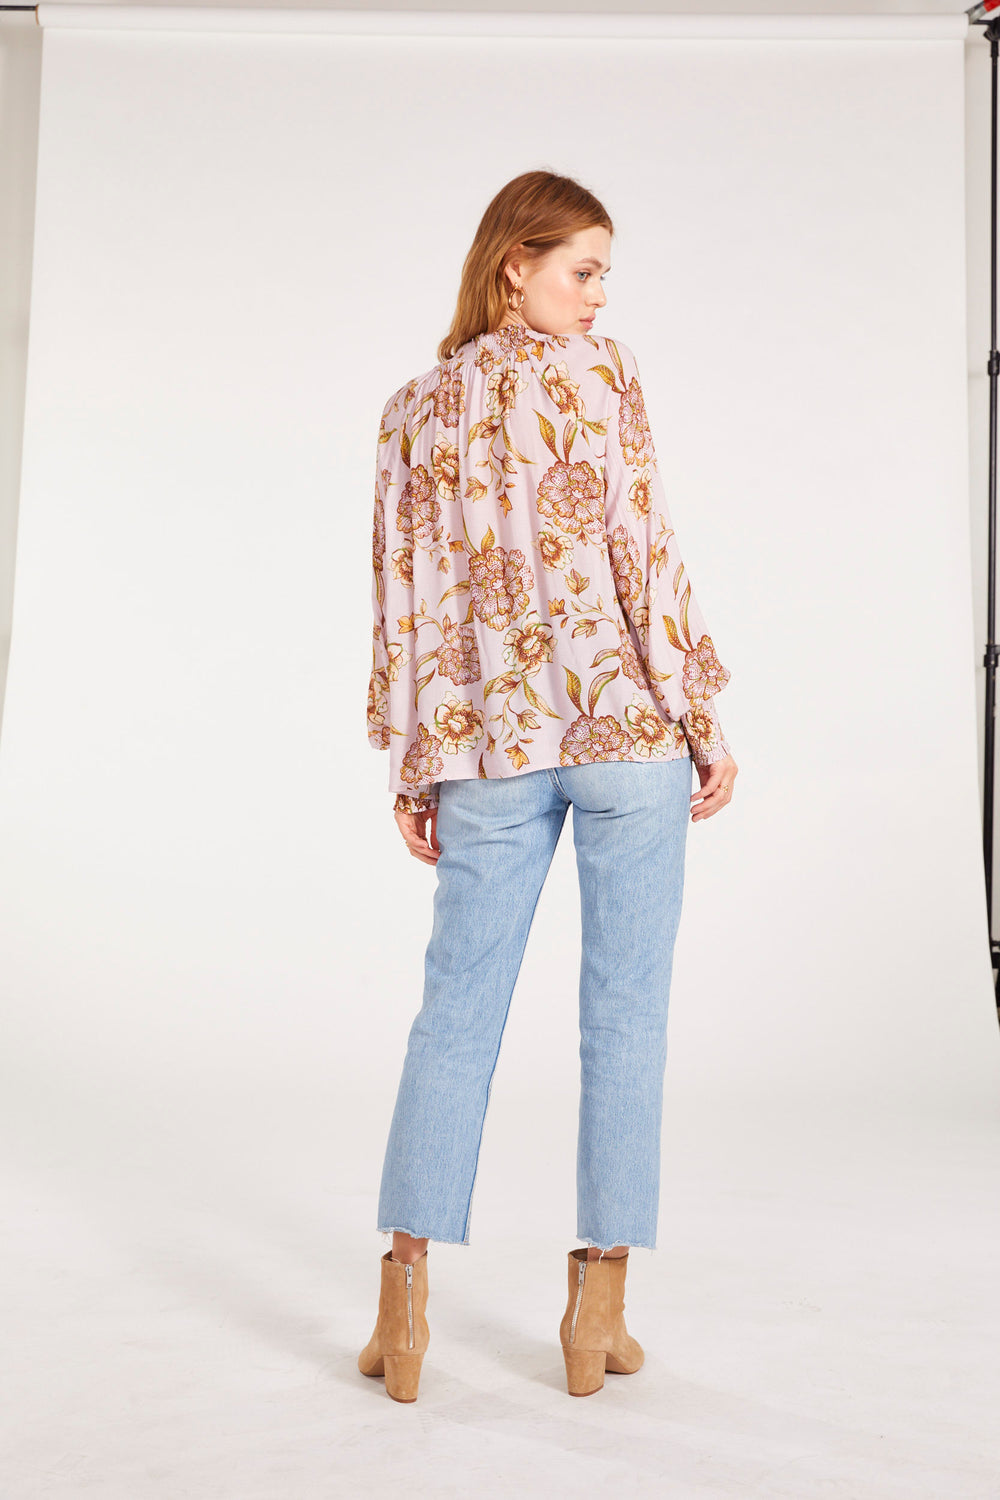 GO WITH THE FLOW-RAL TOP - Kingfisher Road - Online Boutique